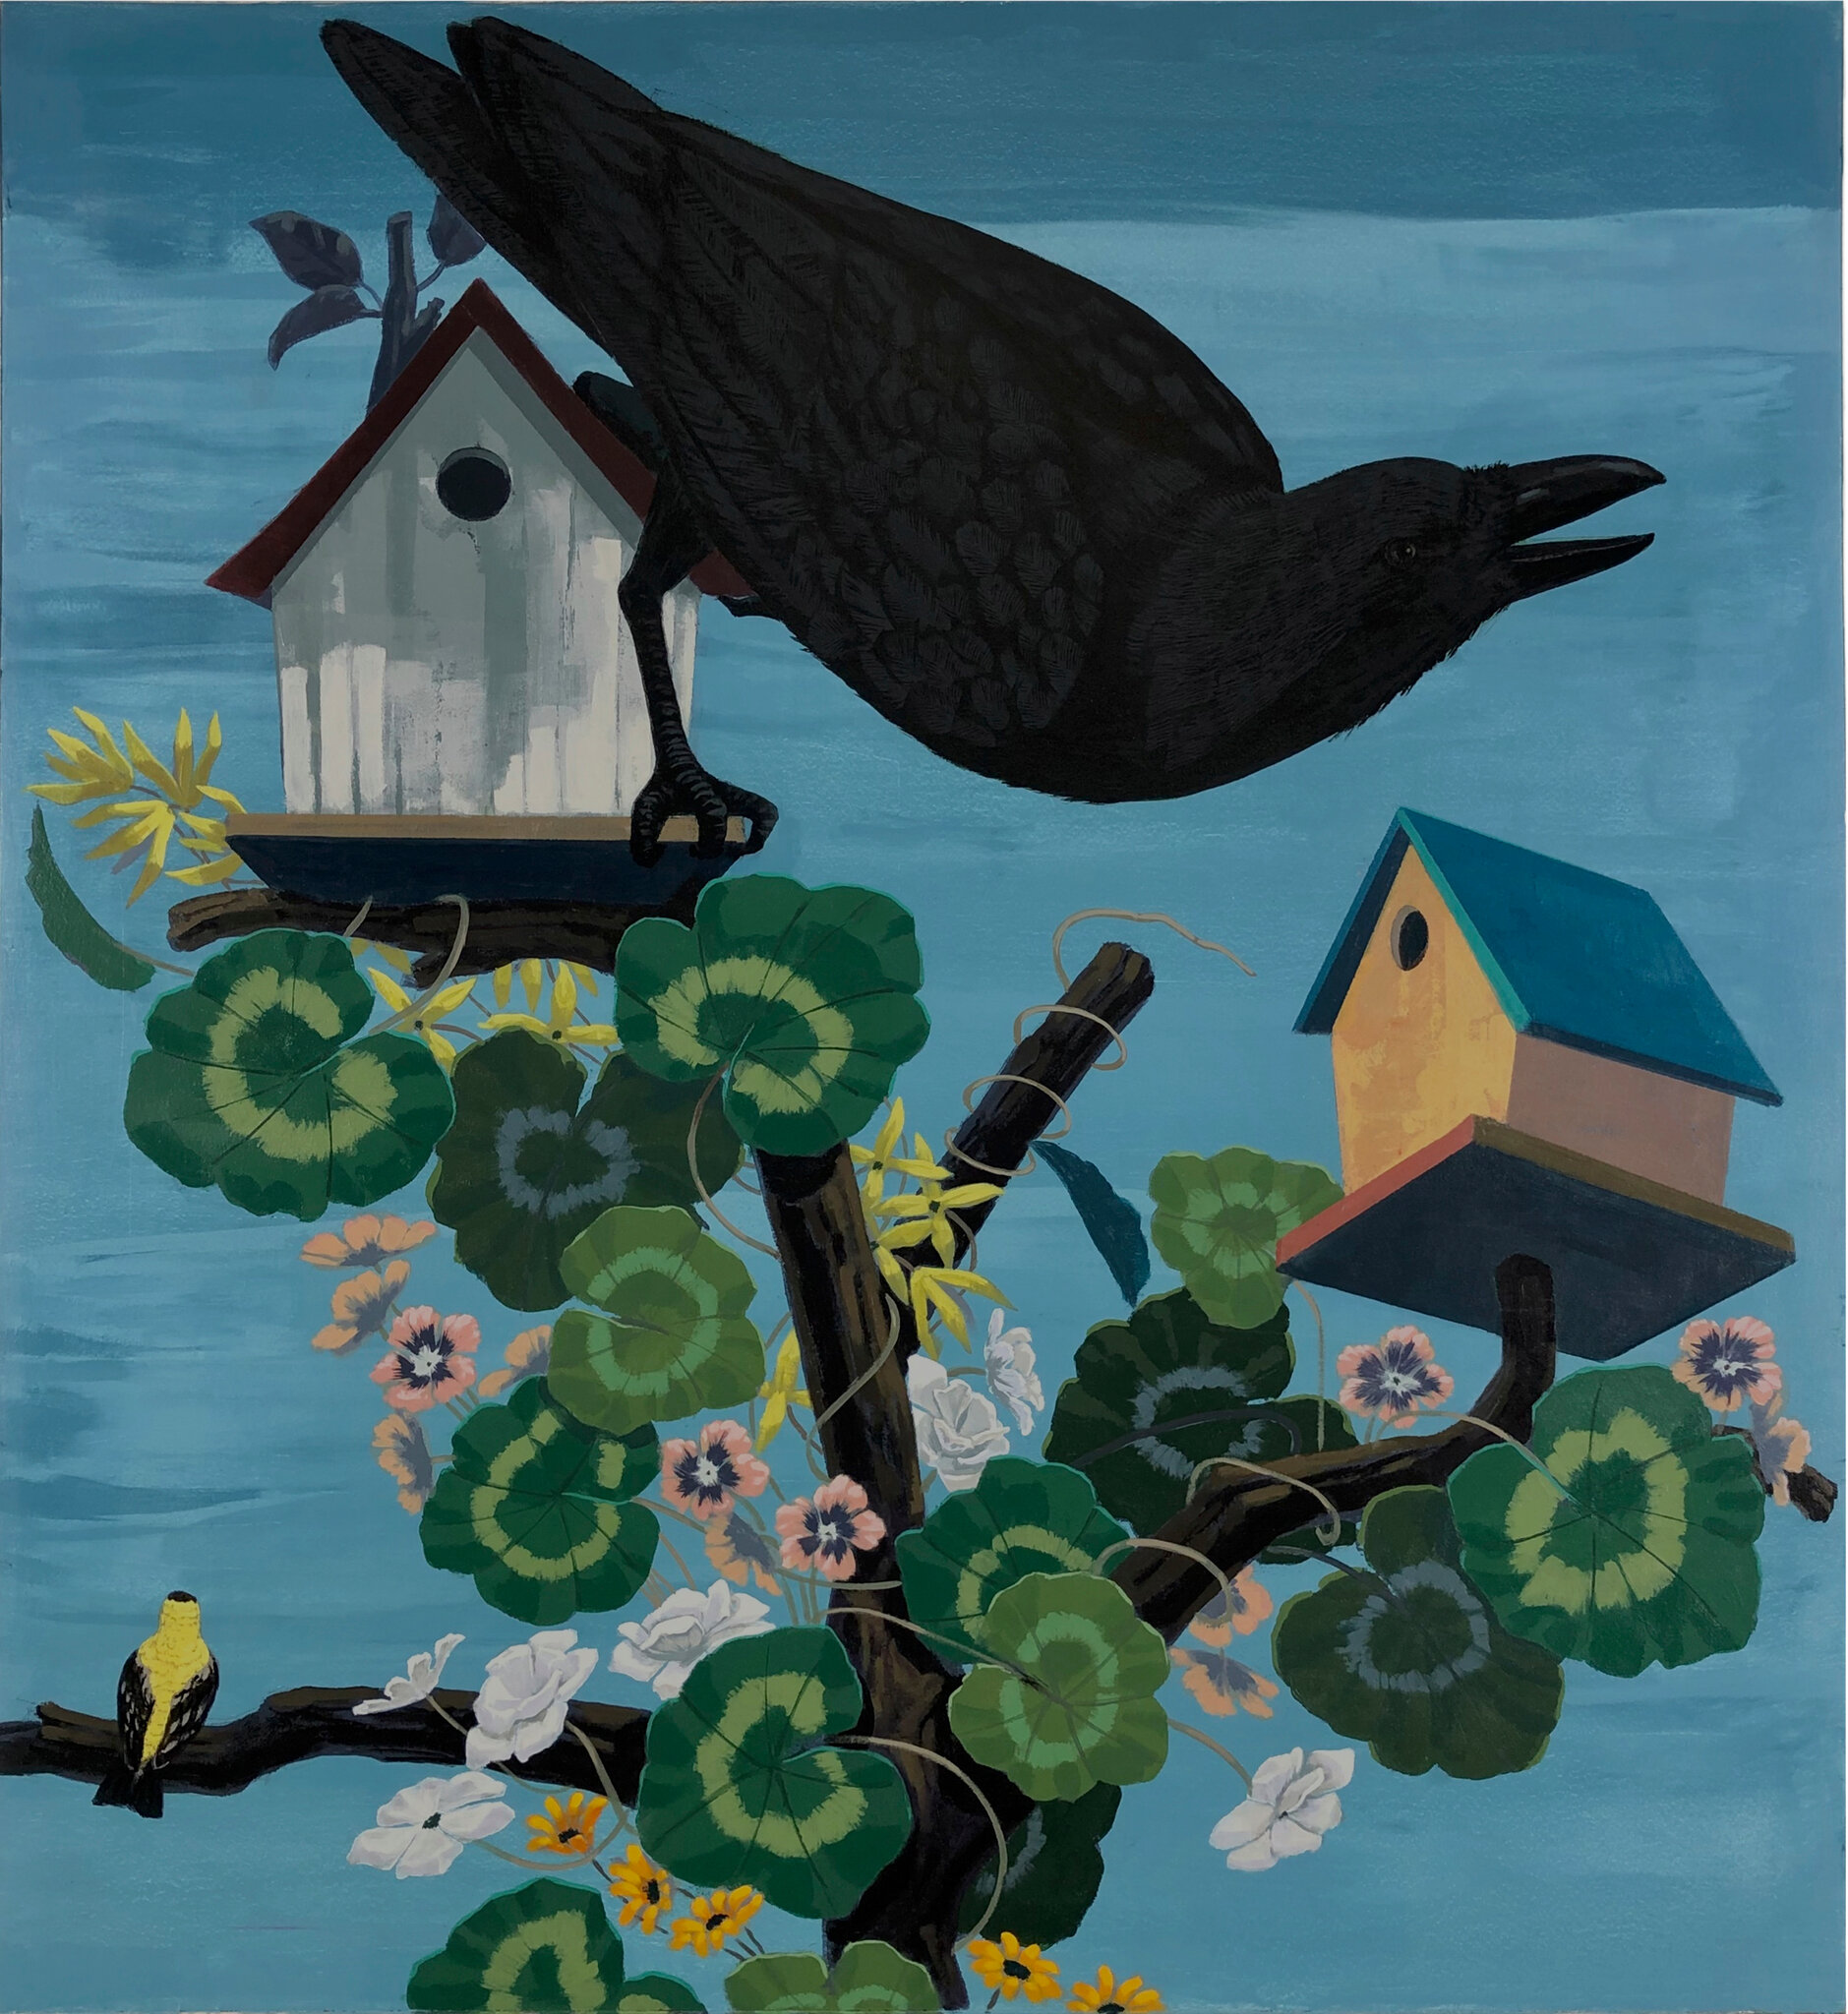 Black and part Black Birds in America: (Crow, Goldfinch) 2020, by Kerry James Marshall. Courtesy of the artist and David Zwirner